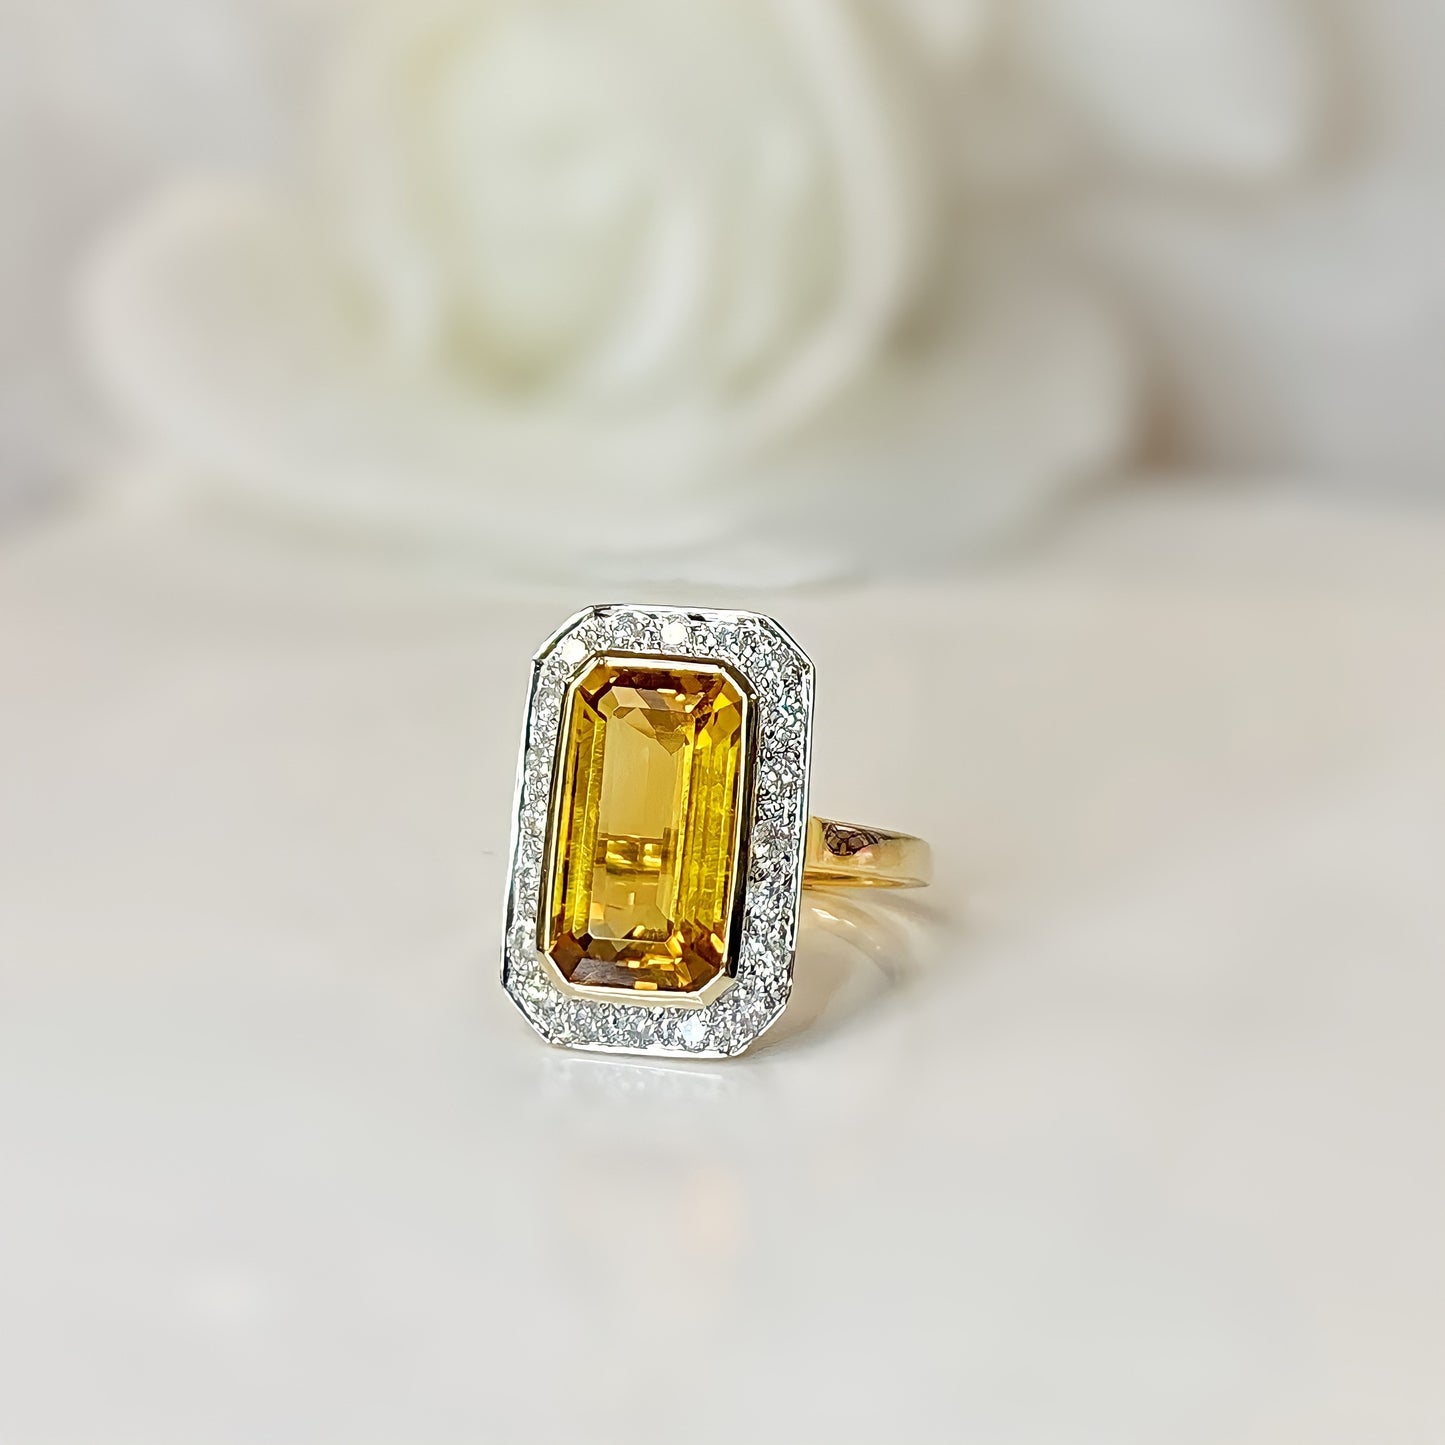 Alluring 9ct Yellow Gold Madeira Citrine and Diamond Halo Cocktail Ring - SIZE N 1/2